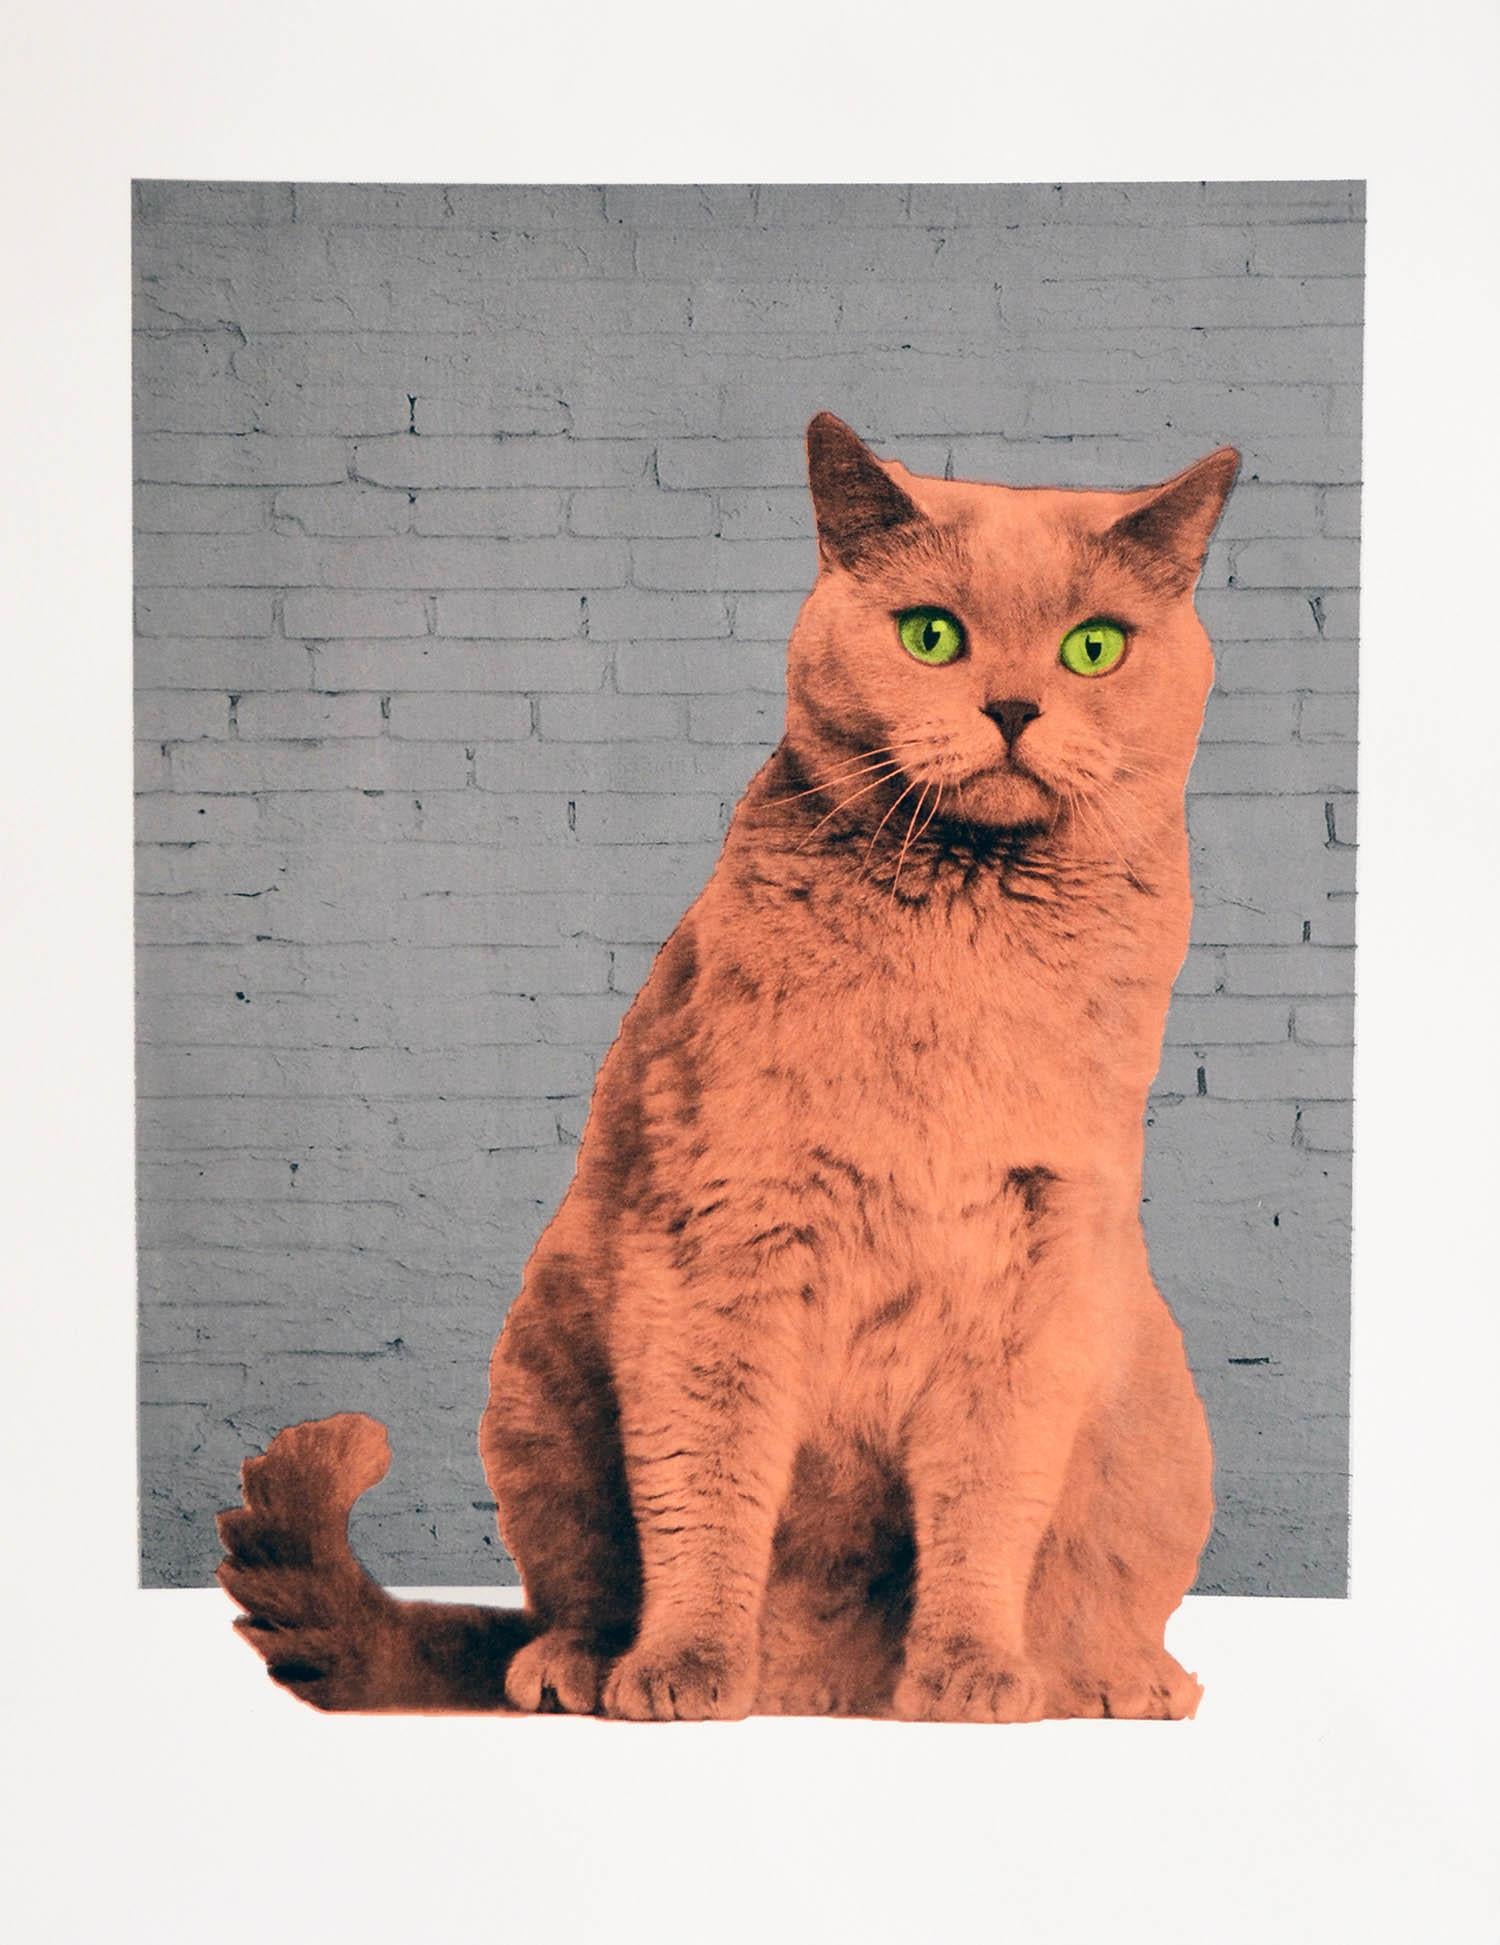 Anne Storno

A limited edition, hand printed screen print, made in England. Everybody wants to be a cat .

A British Shorthair cat printed in fluorescent pink on a brick wall background. This urban background gives him a modern and pop